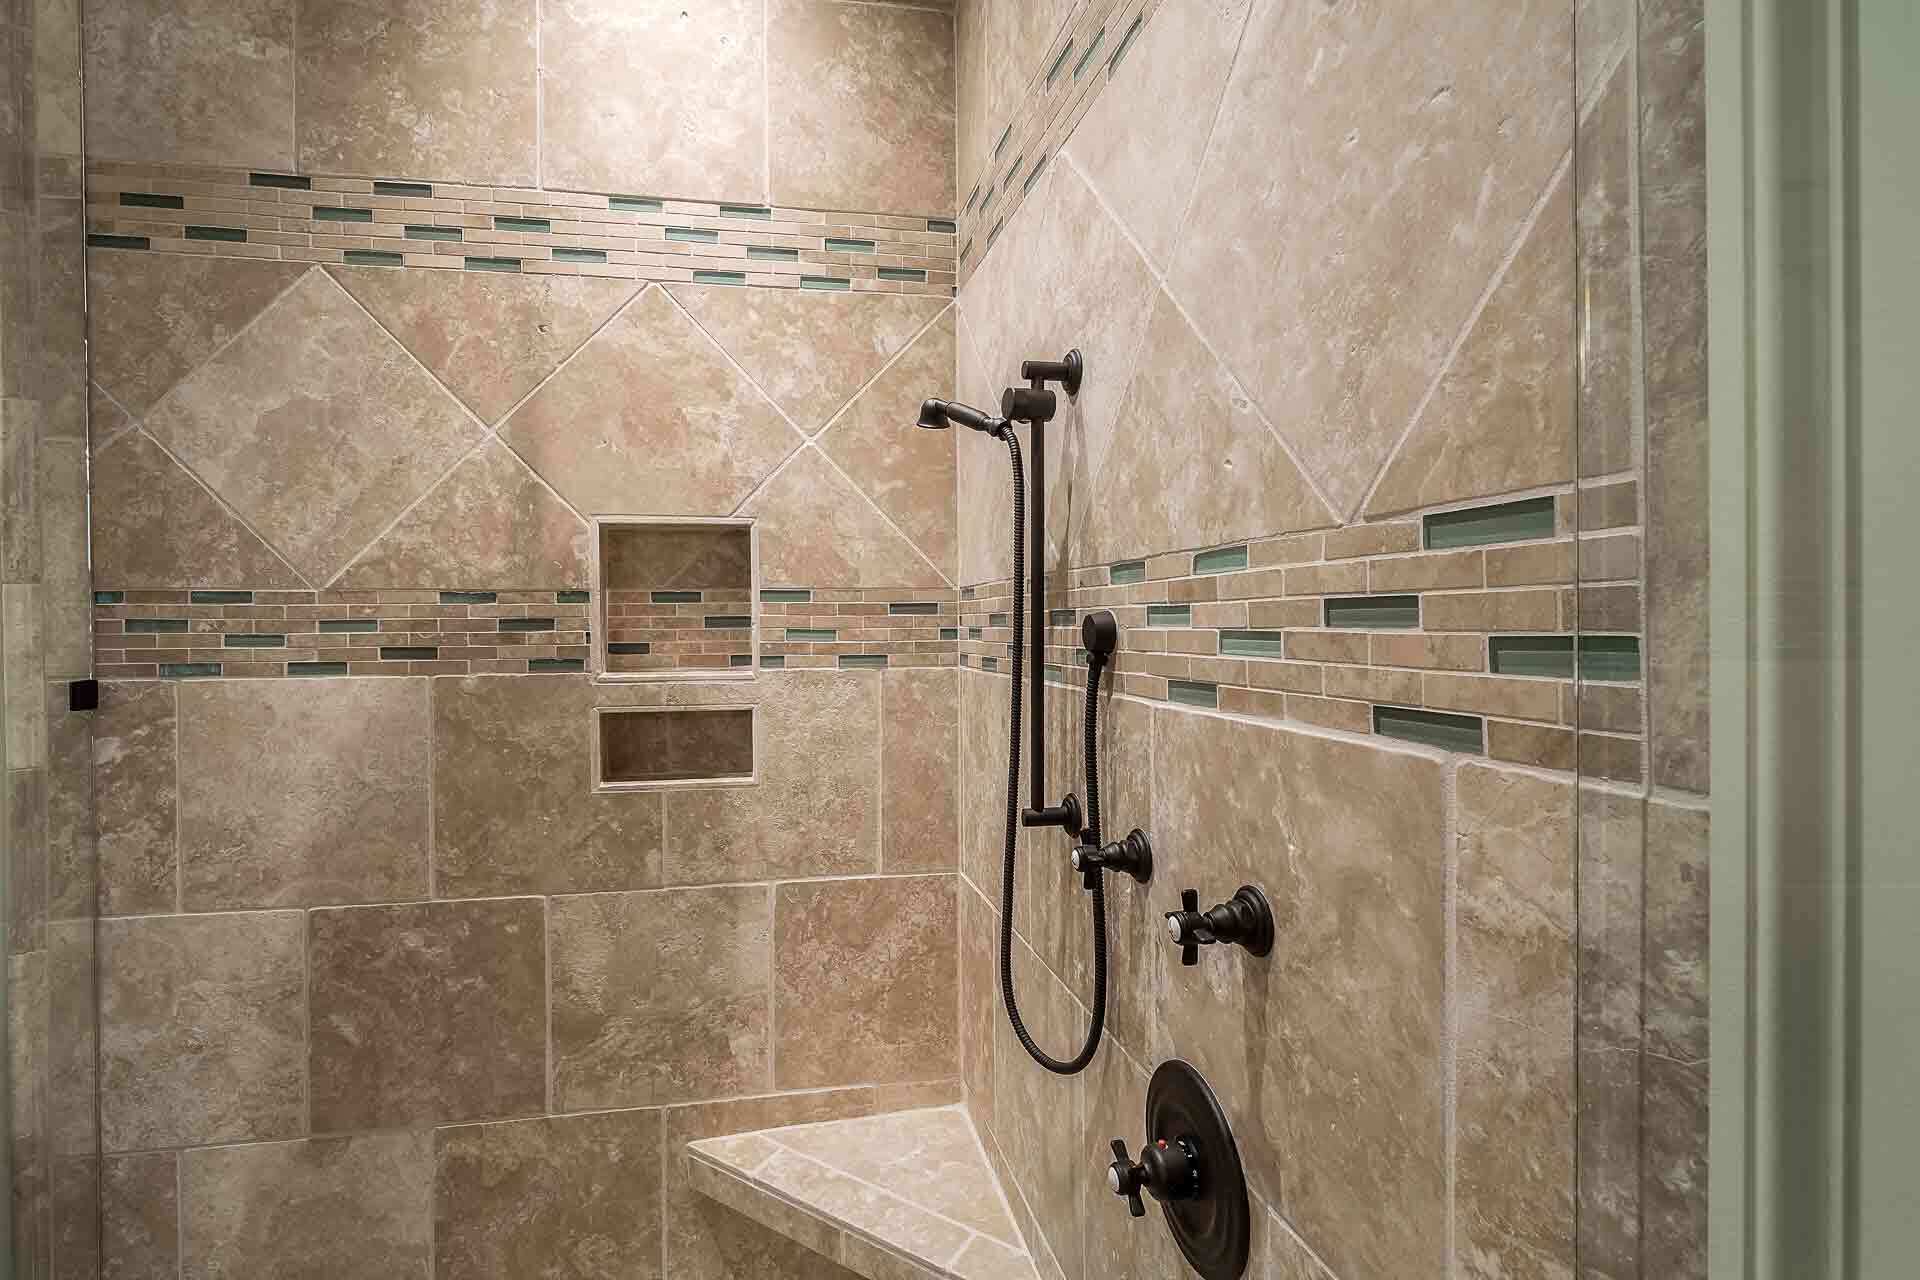 How to Install Shower Tile: Step-by-Step Guide